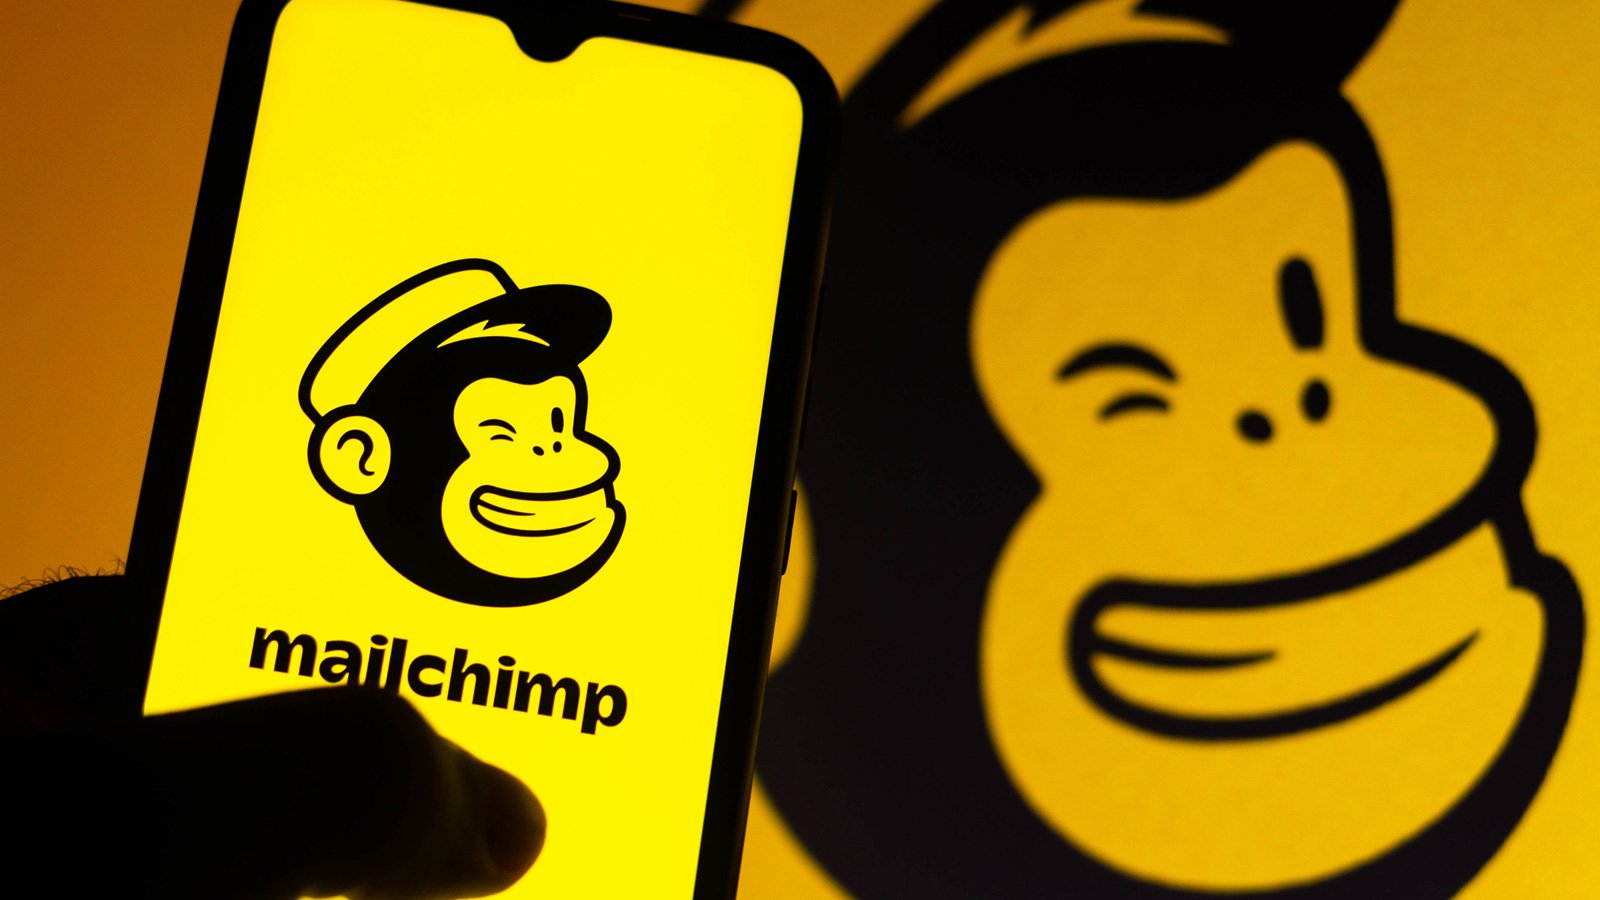 MailChimp logo on a mobile phone